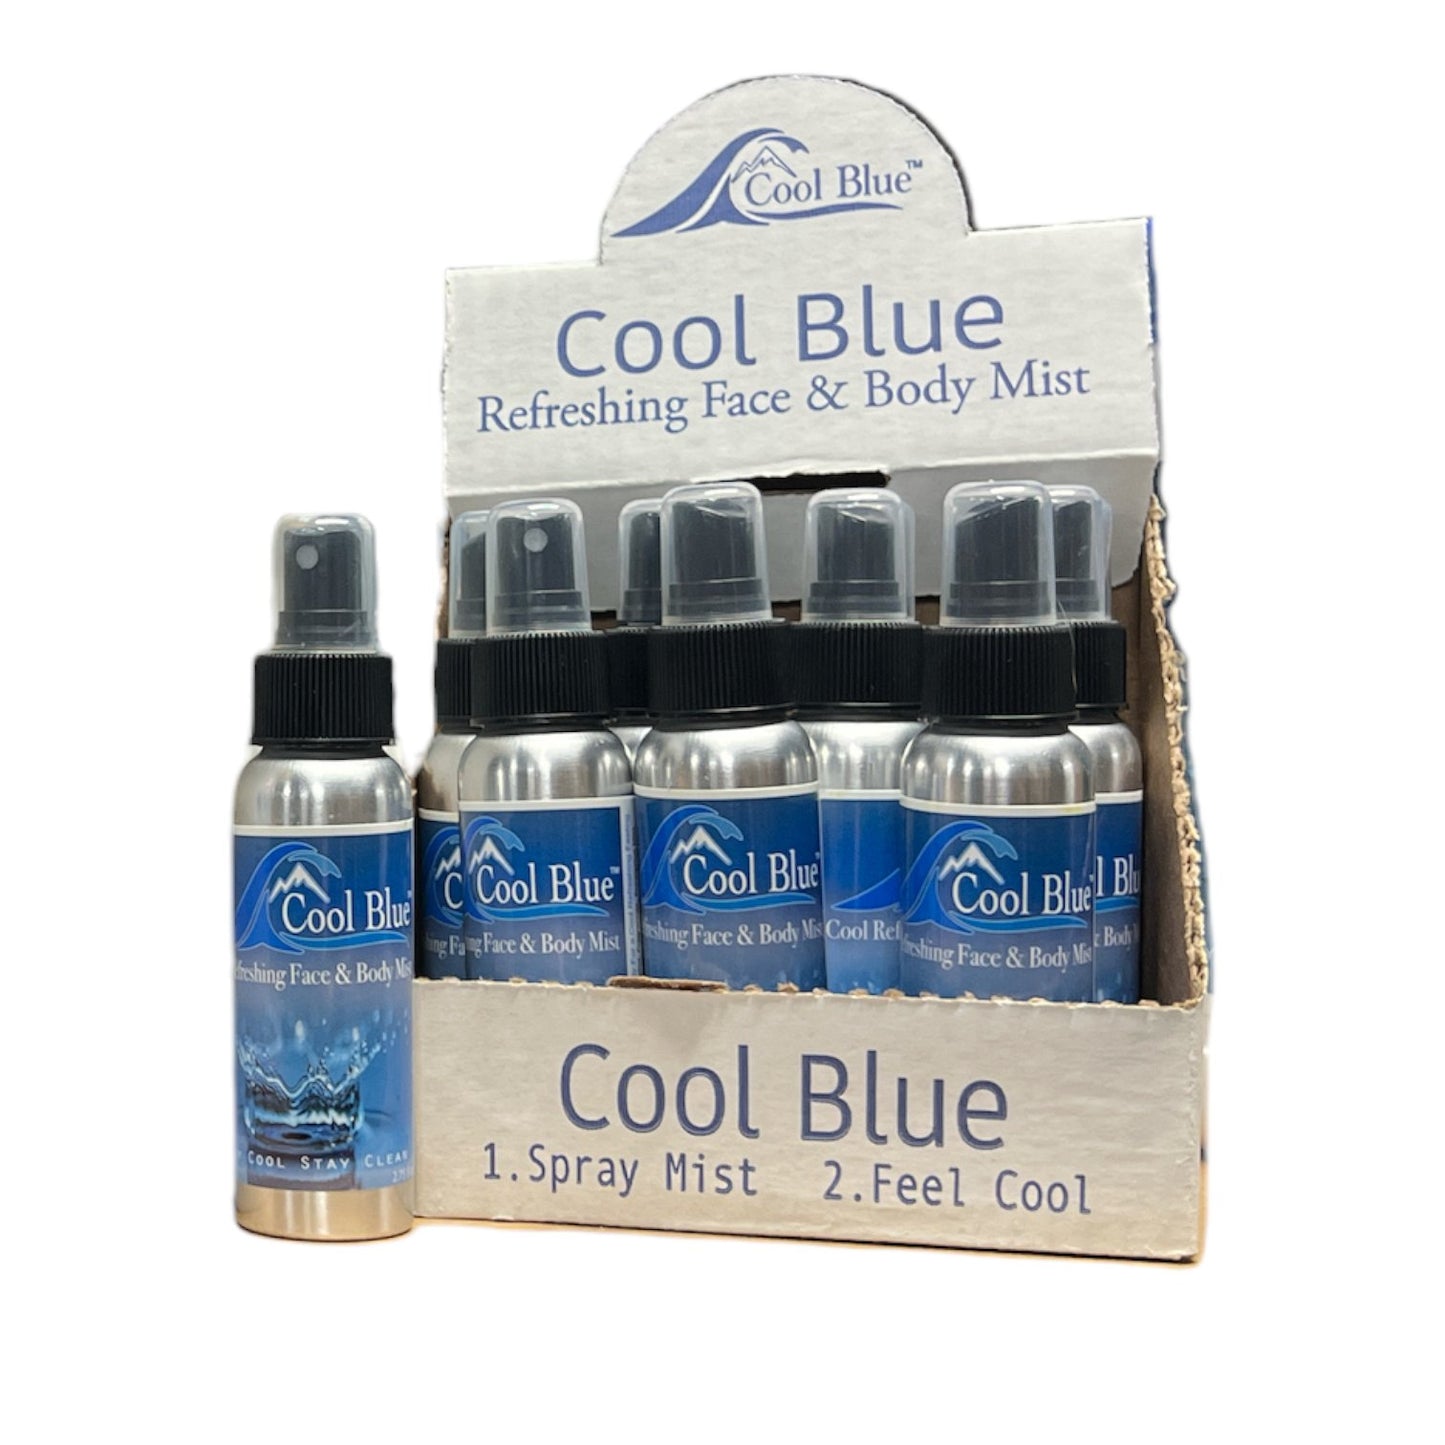 Cool Refreshing Face & Body Mist, 12 Count Case - coolblueproducts